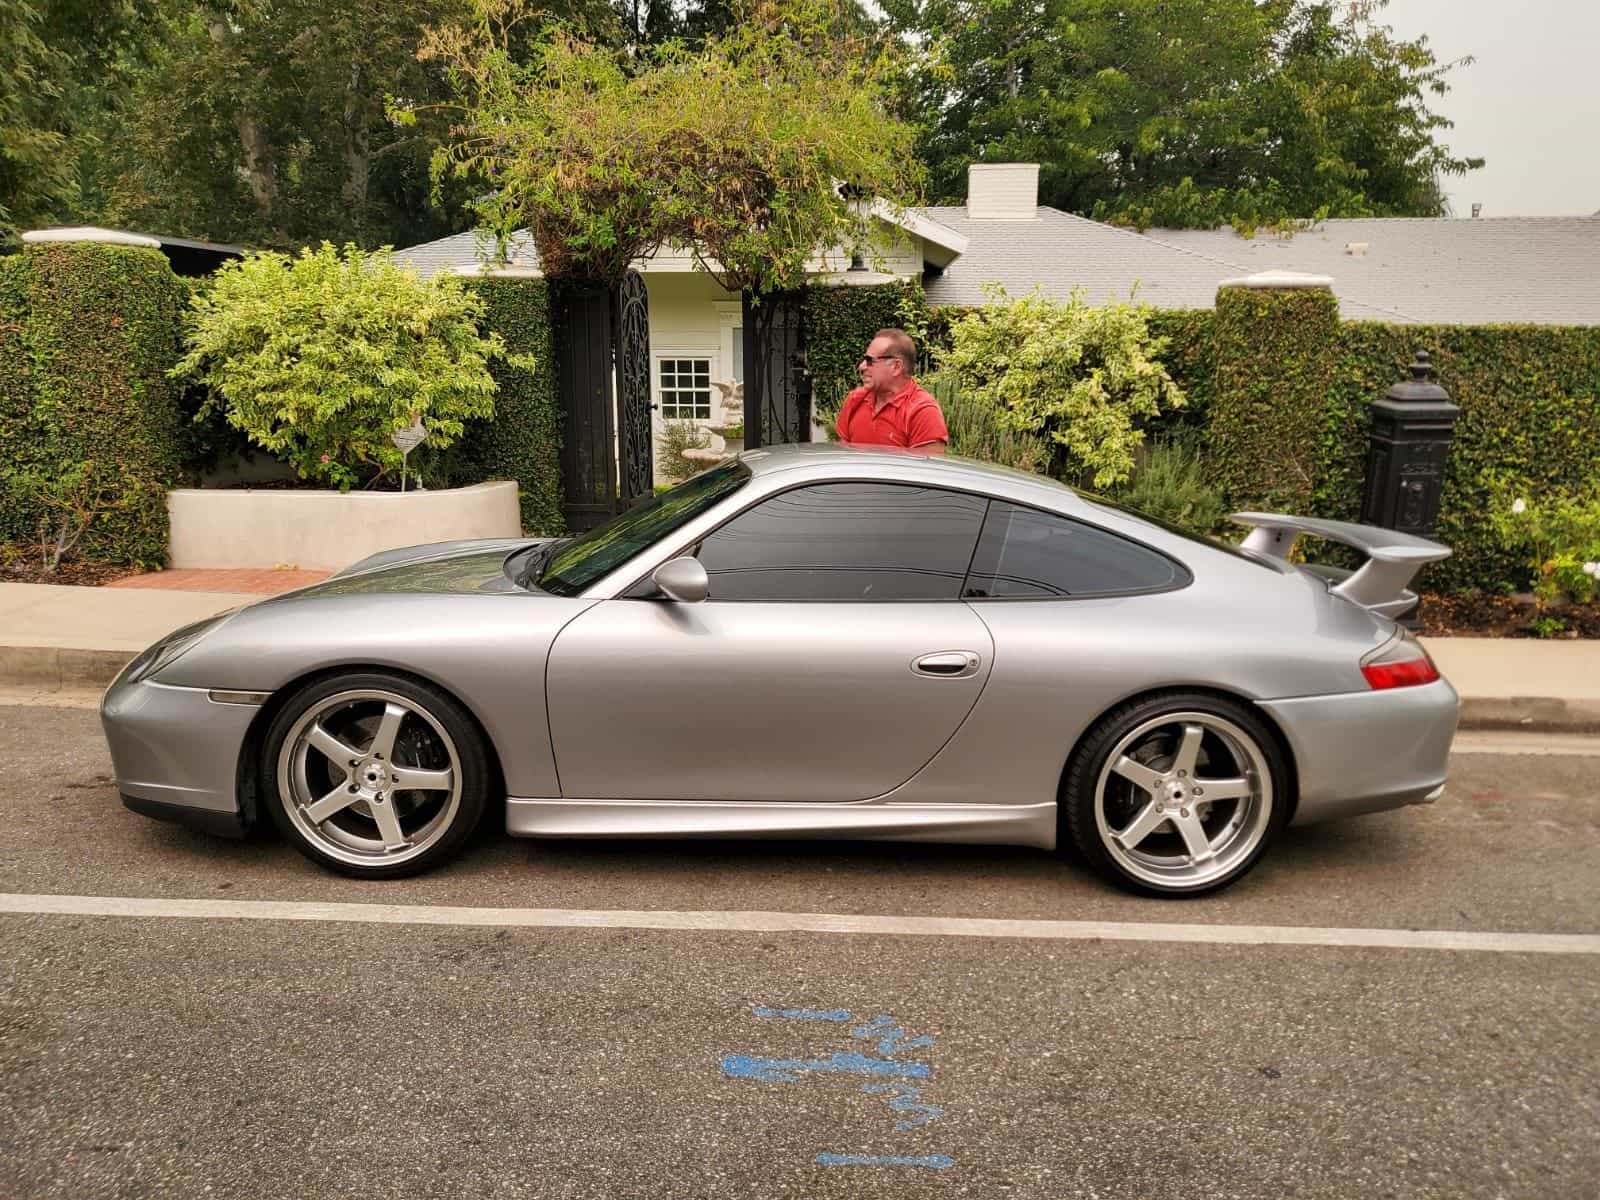 2004 Porsche 911 - 2004 Porsche 911 40th Anniversary - Used - VIN WP0AA29944S621864 - 66,500 Miles - 6 cyl - 2WD - Manual - Coupe - Silver - North Hollywood, CA 91605, United States